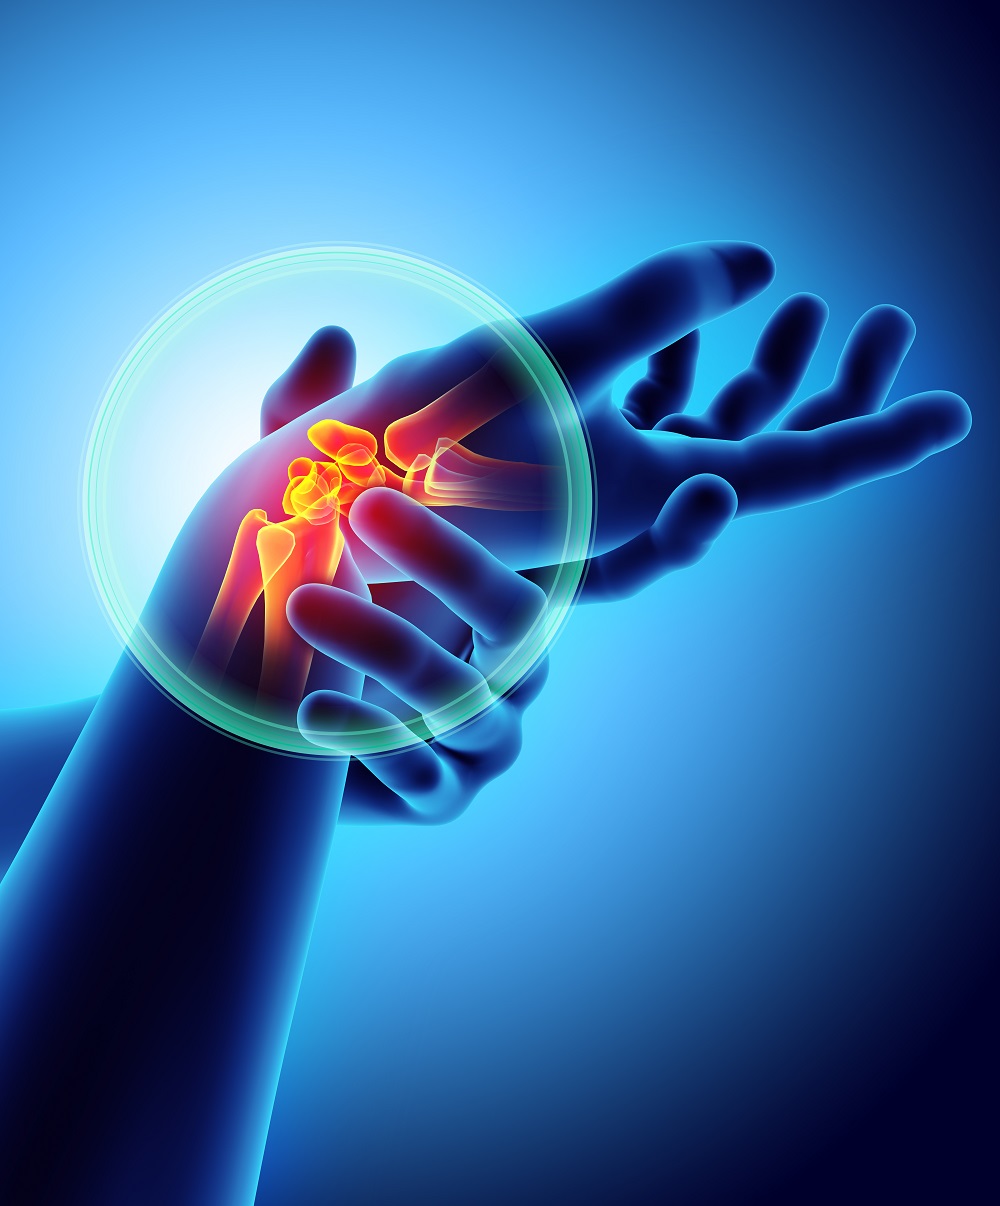 Cannabis Helps With Arthritis Pain And Inflammation?